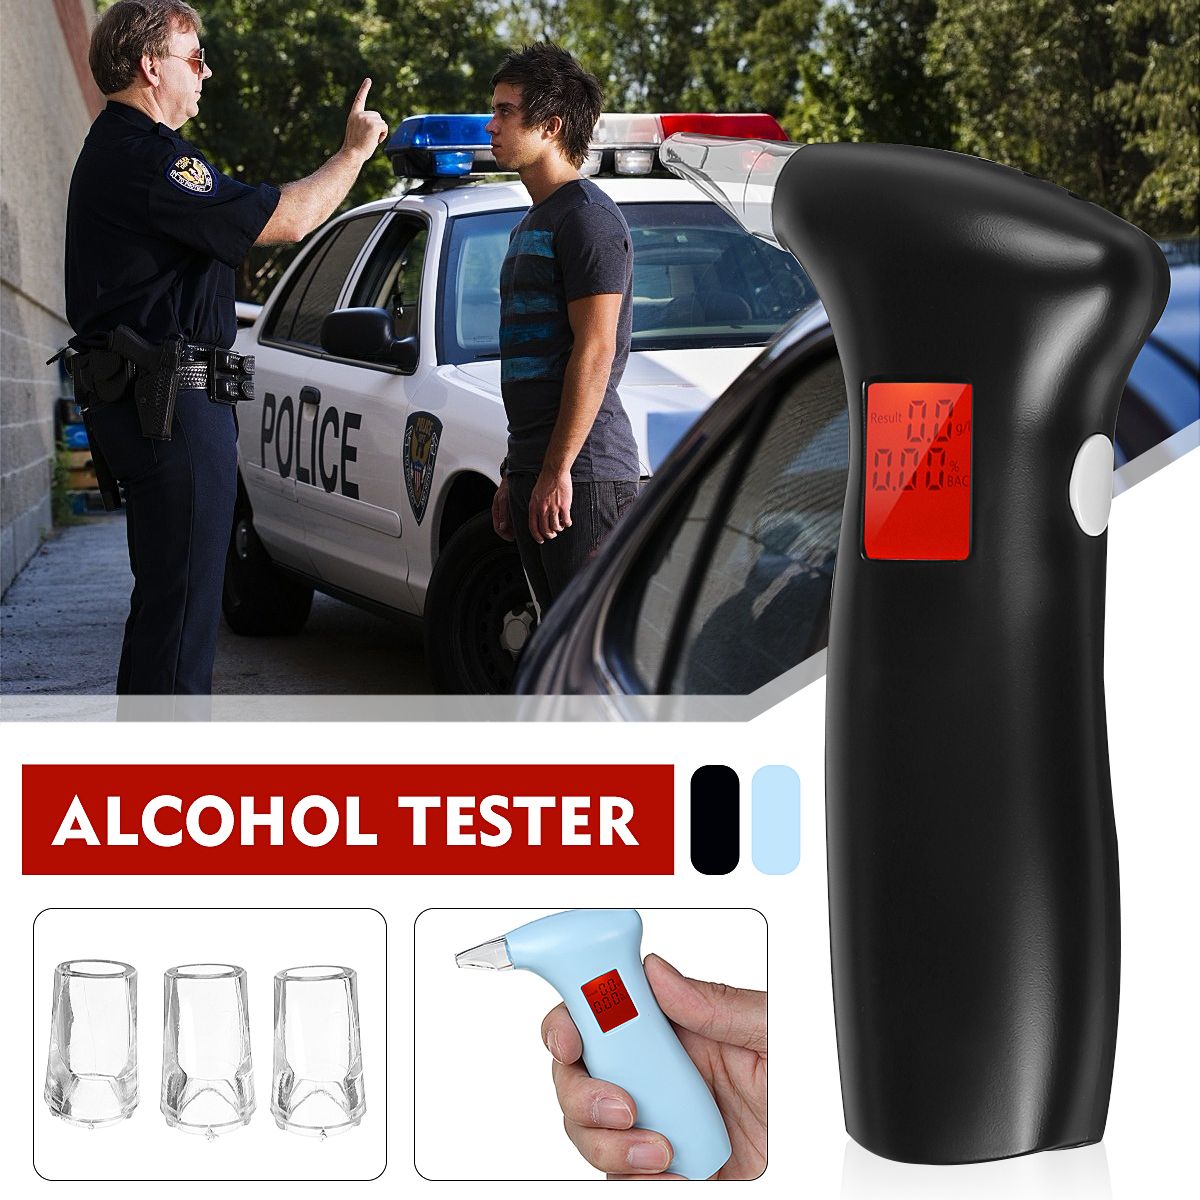 Electronic-Vehicle-Alcohol-Tester-Detector-Police-Breath-Analyser-Breathalyzers-1631661